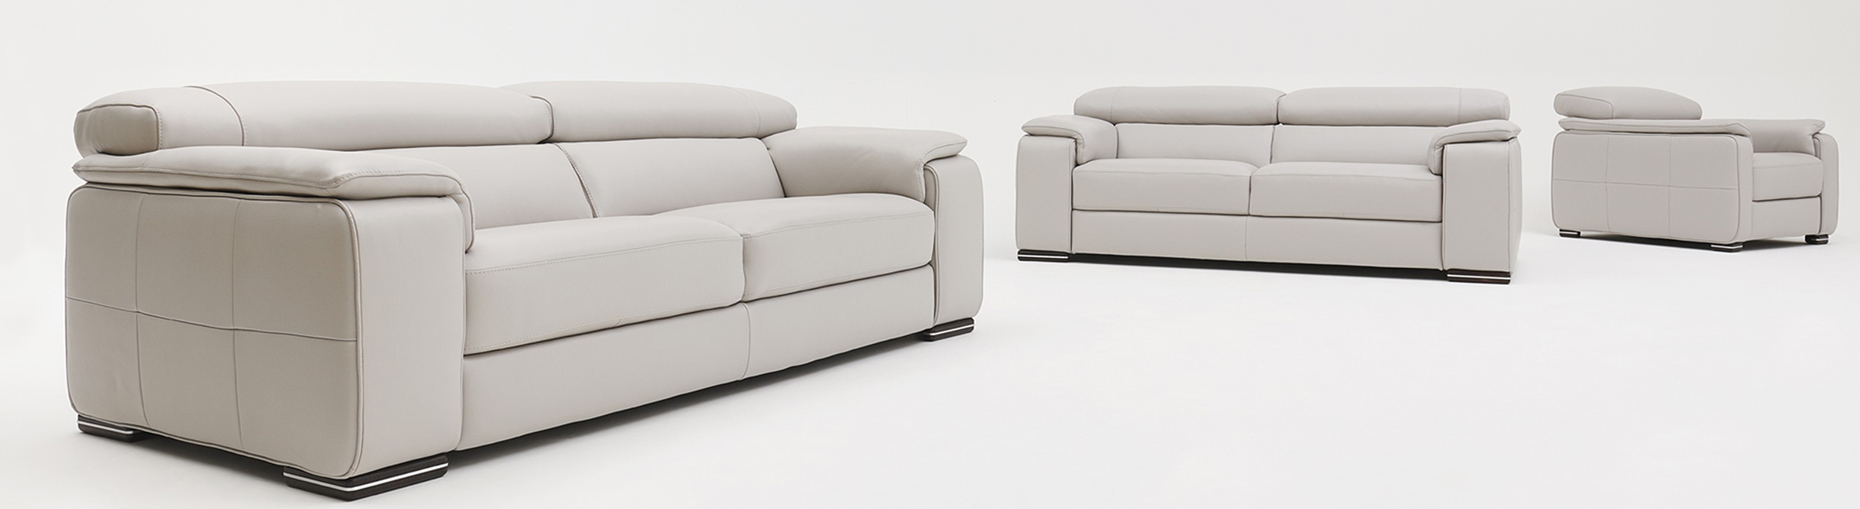 Melo sofa collection at Forrest Furnishing